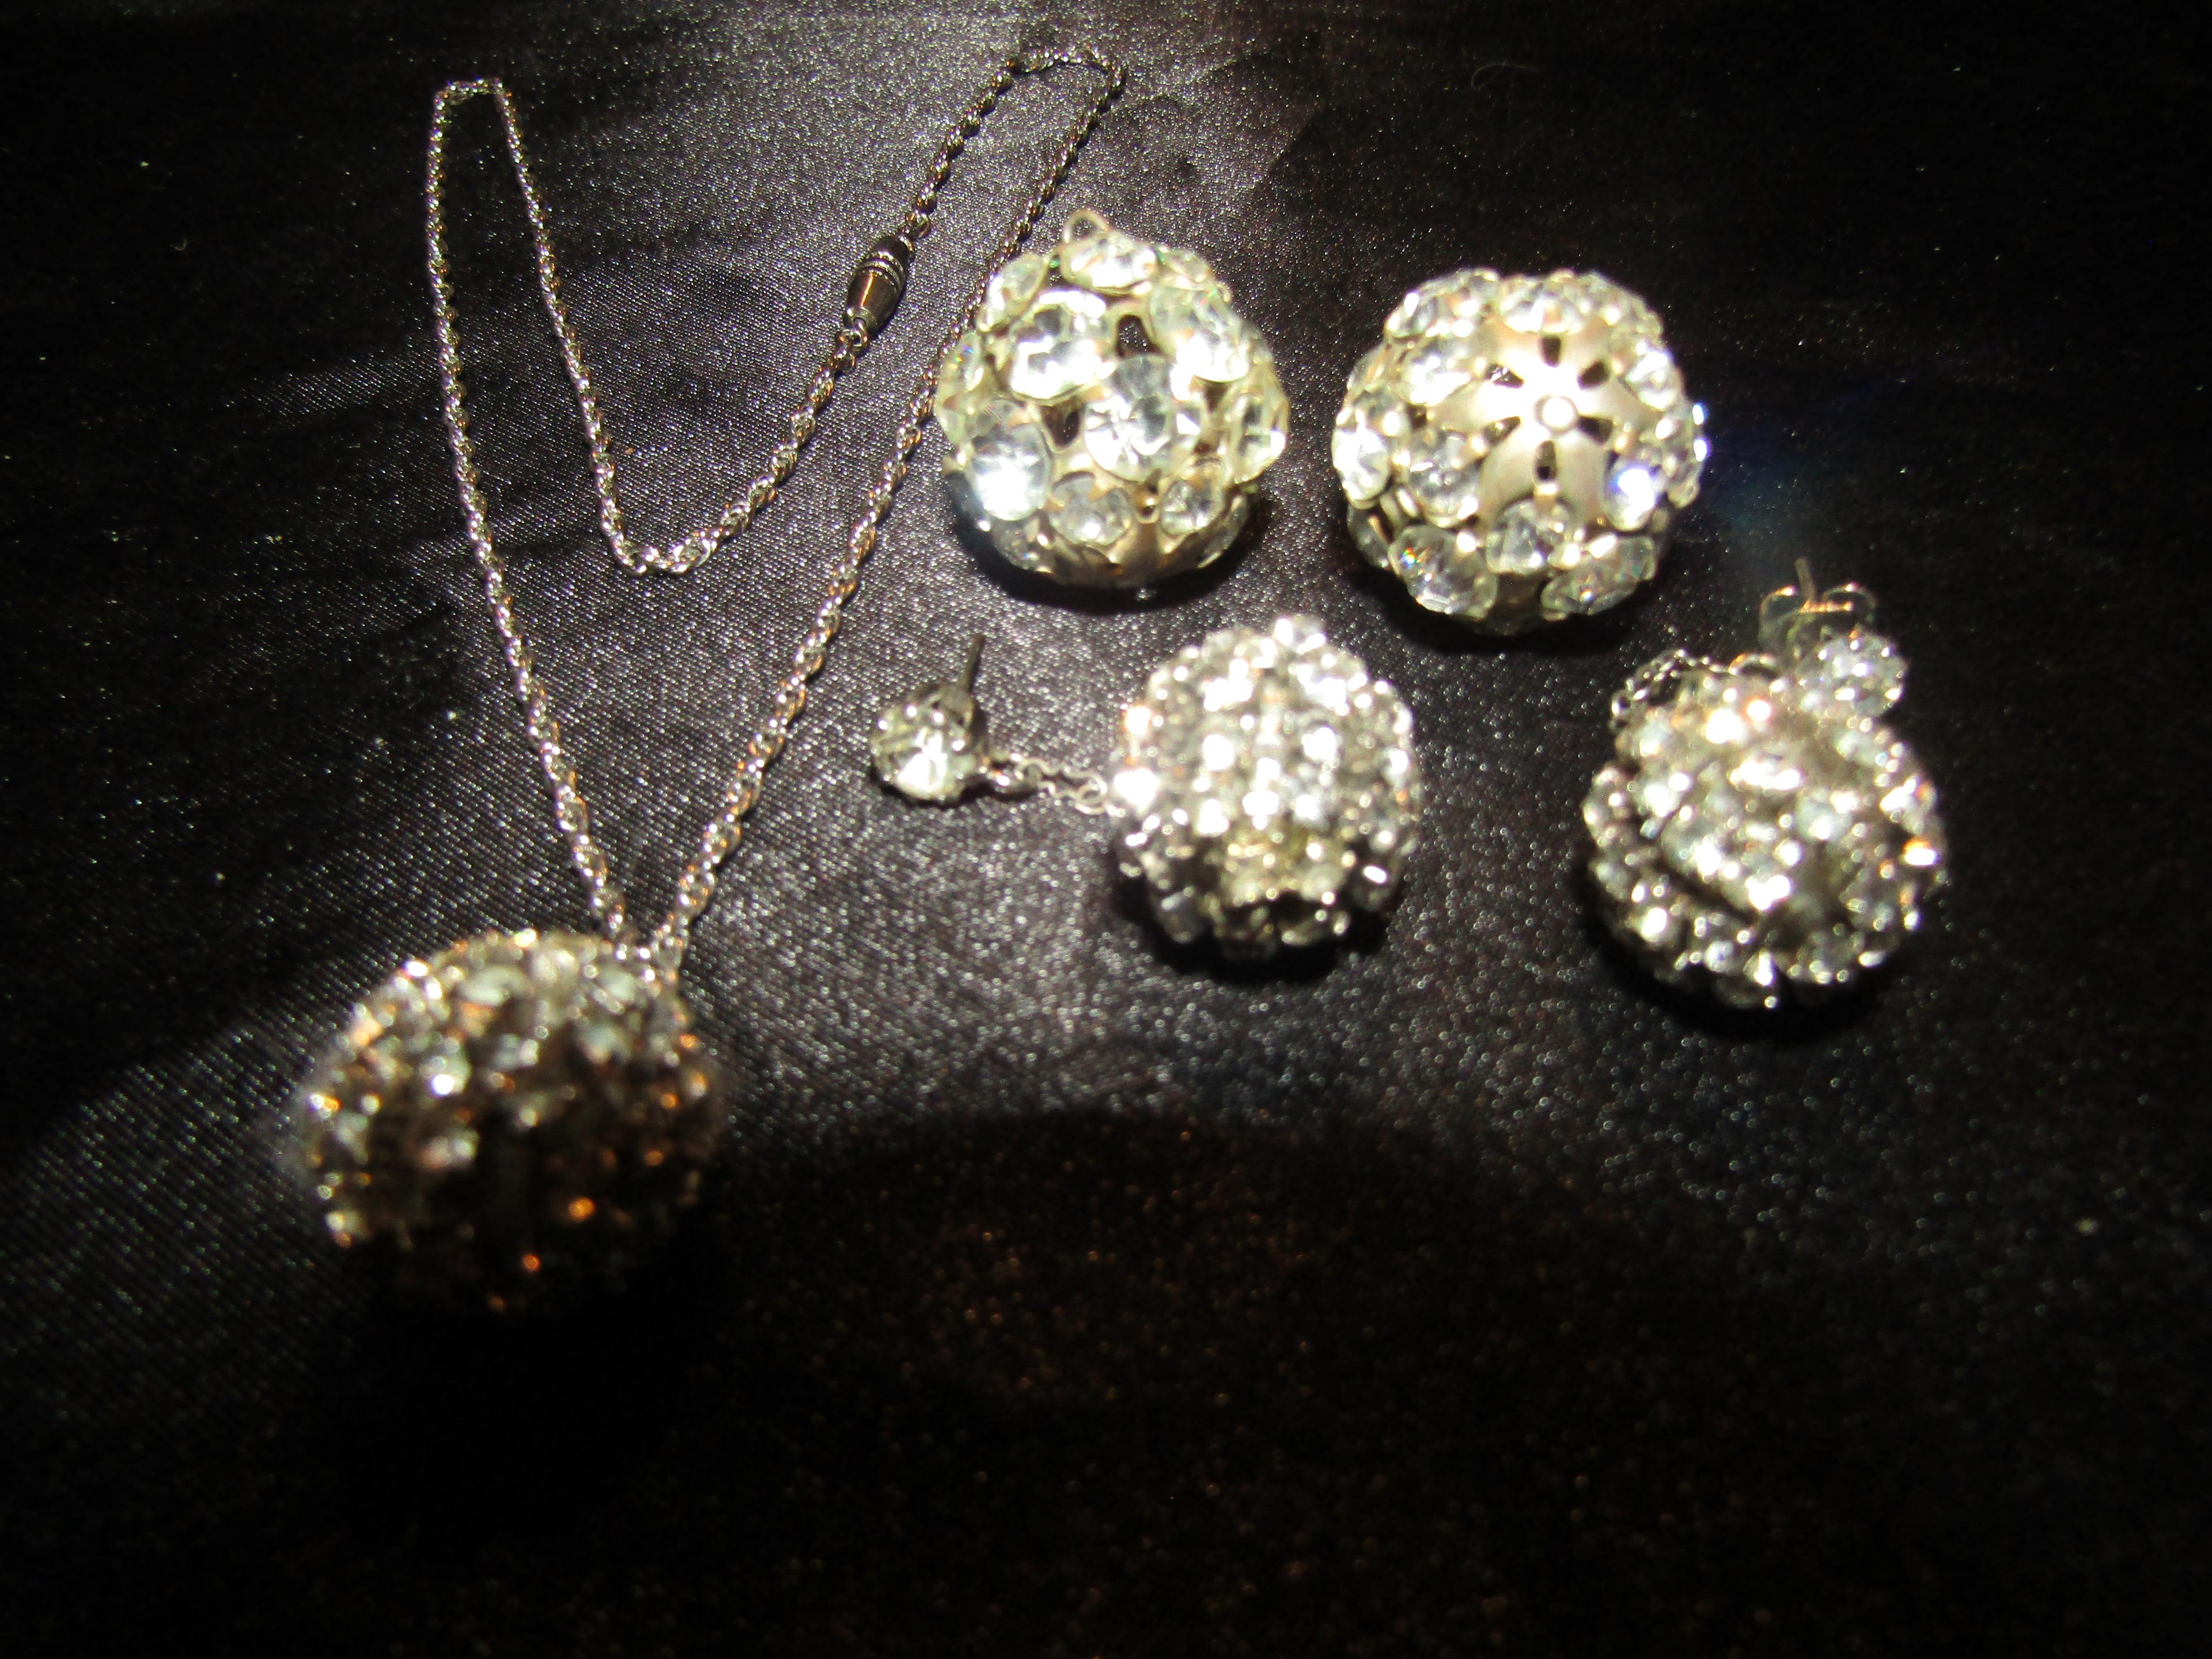 Rhinestone Ball Necklace and 2 Pairs of Earrings